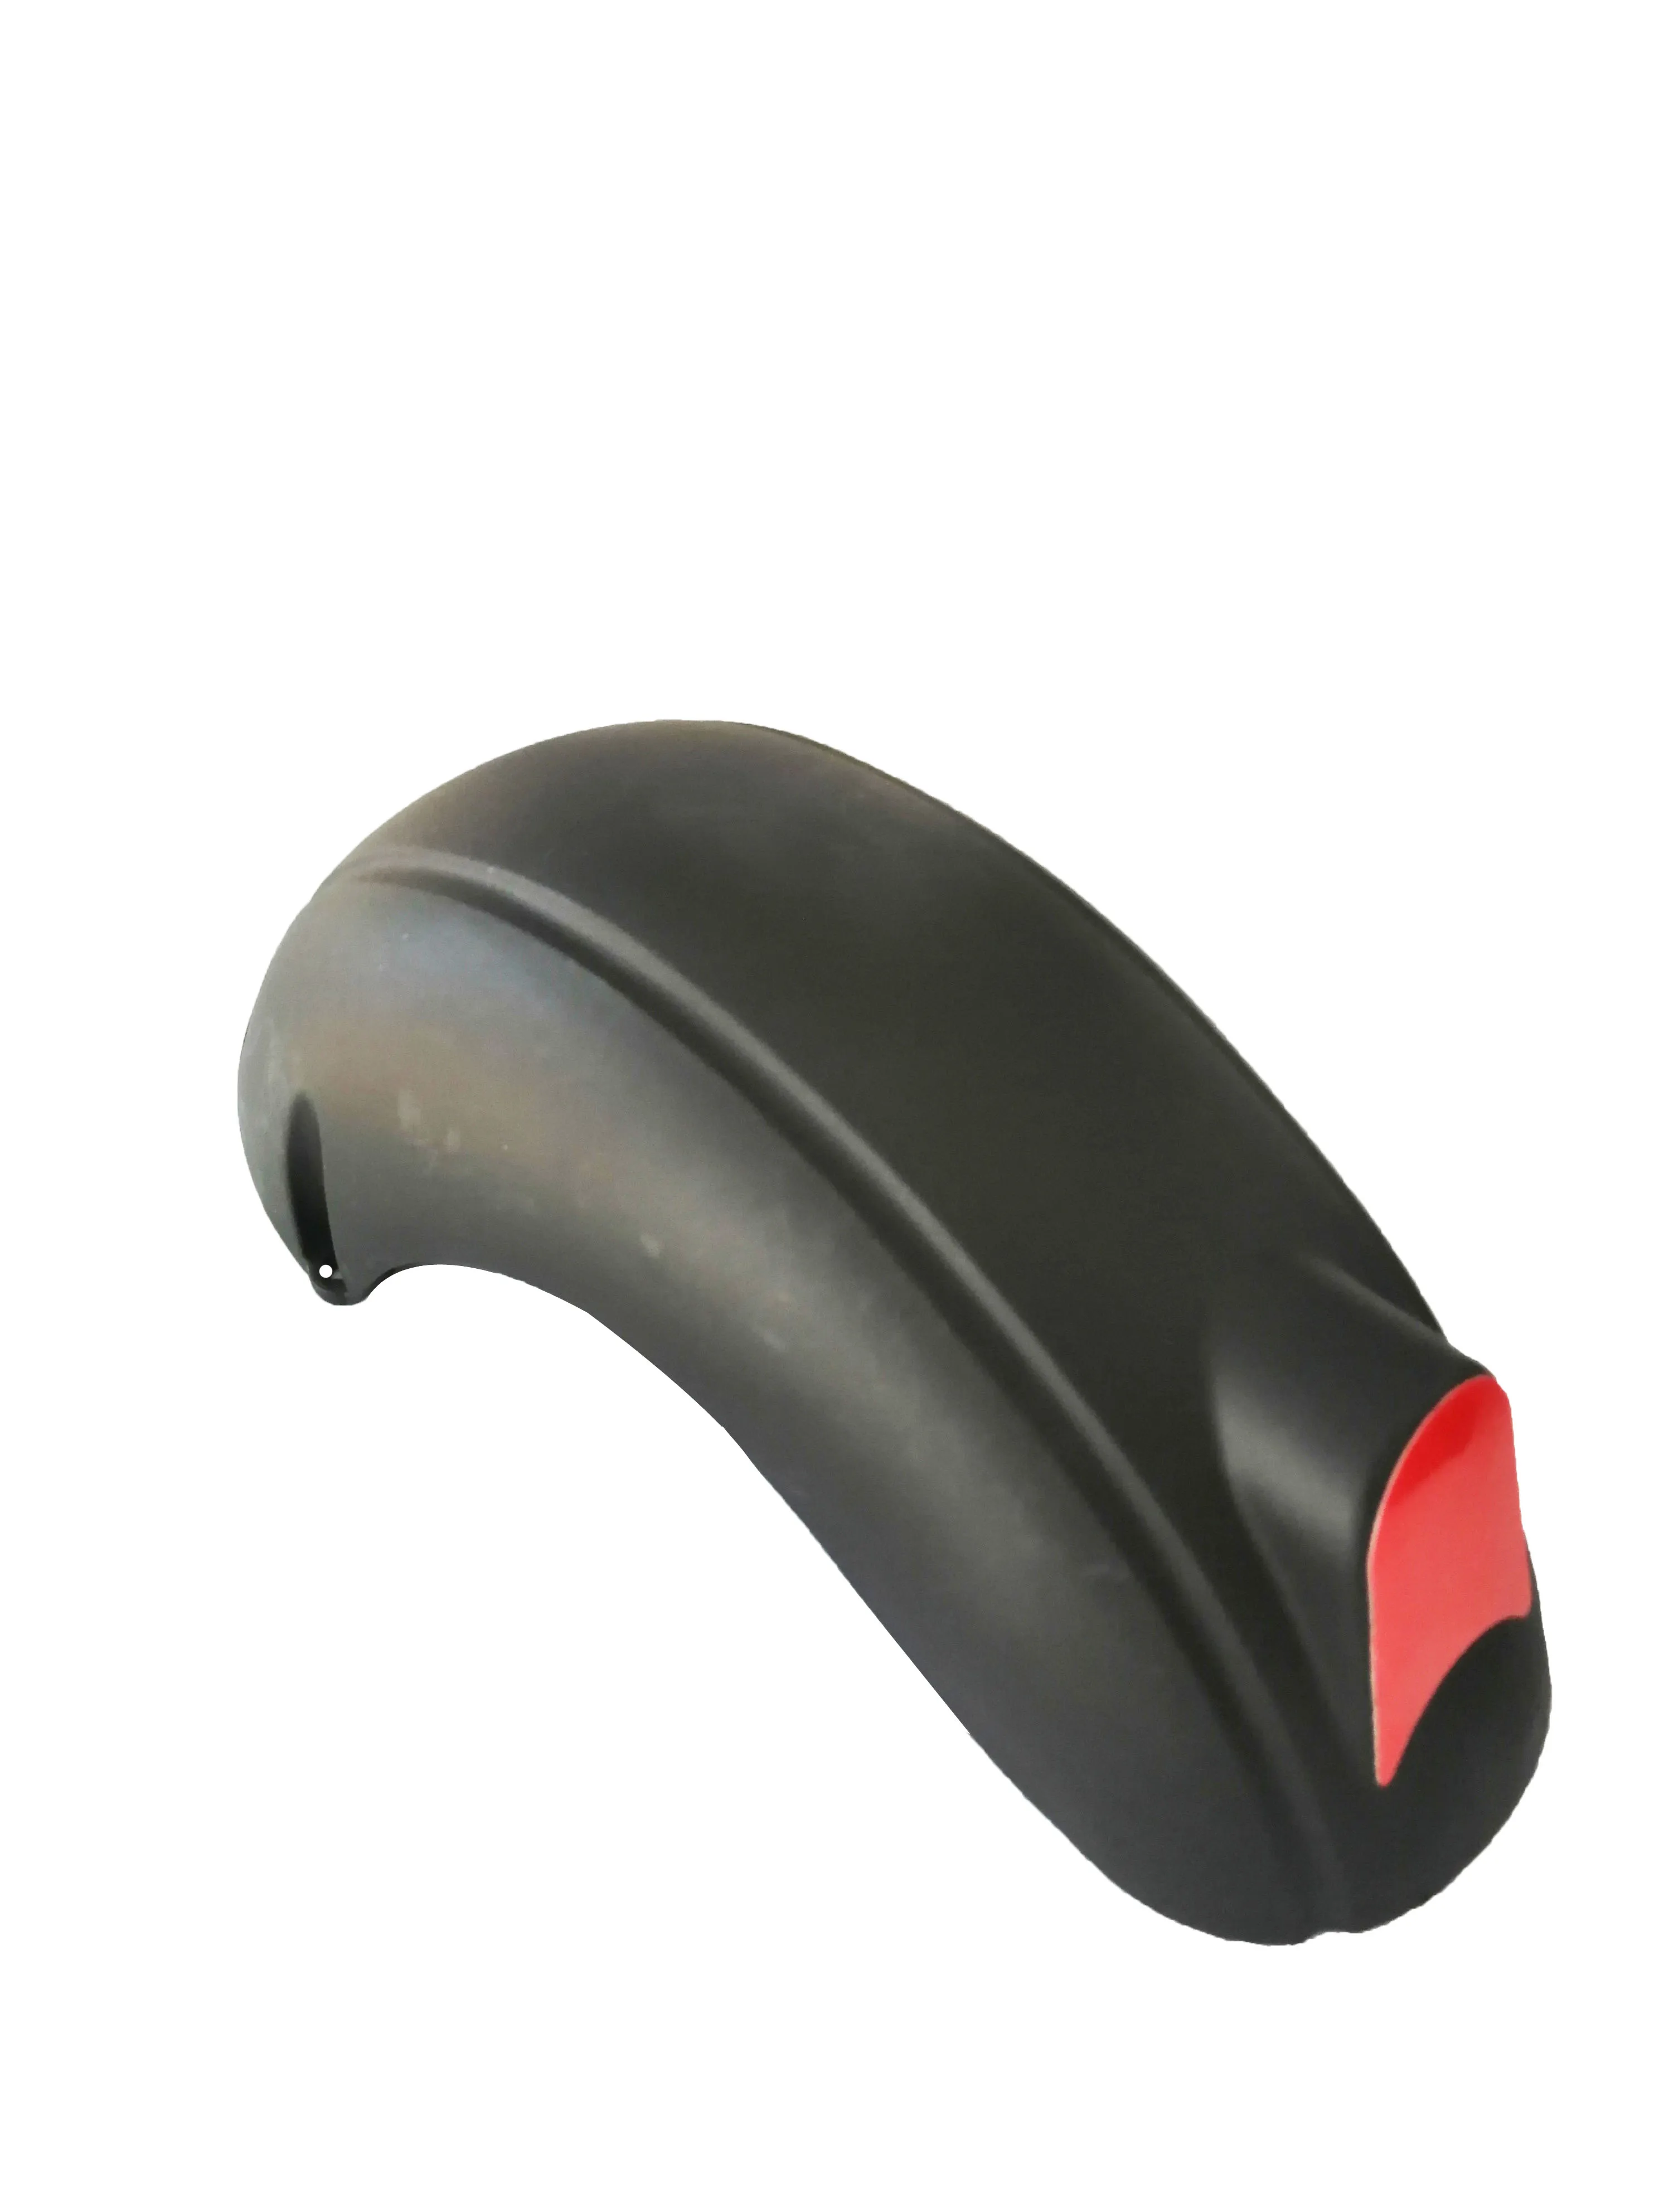 Rear Mudguard For SPEEDWAY RUIMA MINI IV Pro Electric Scooter Skateboard 